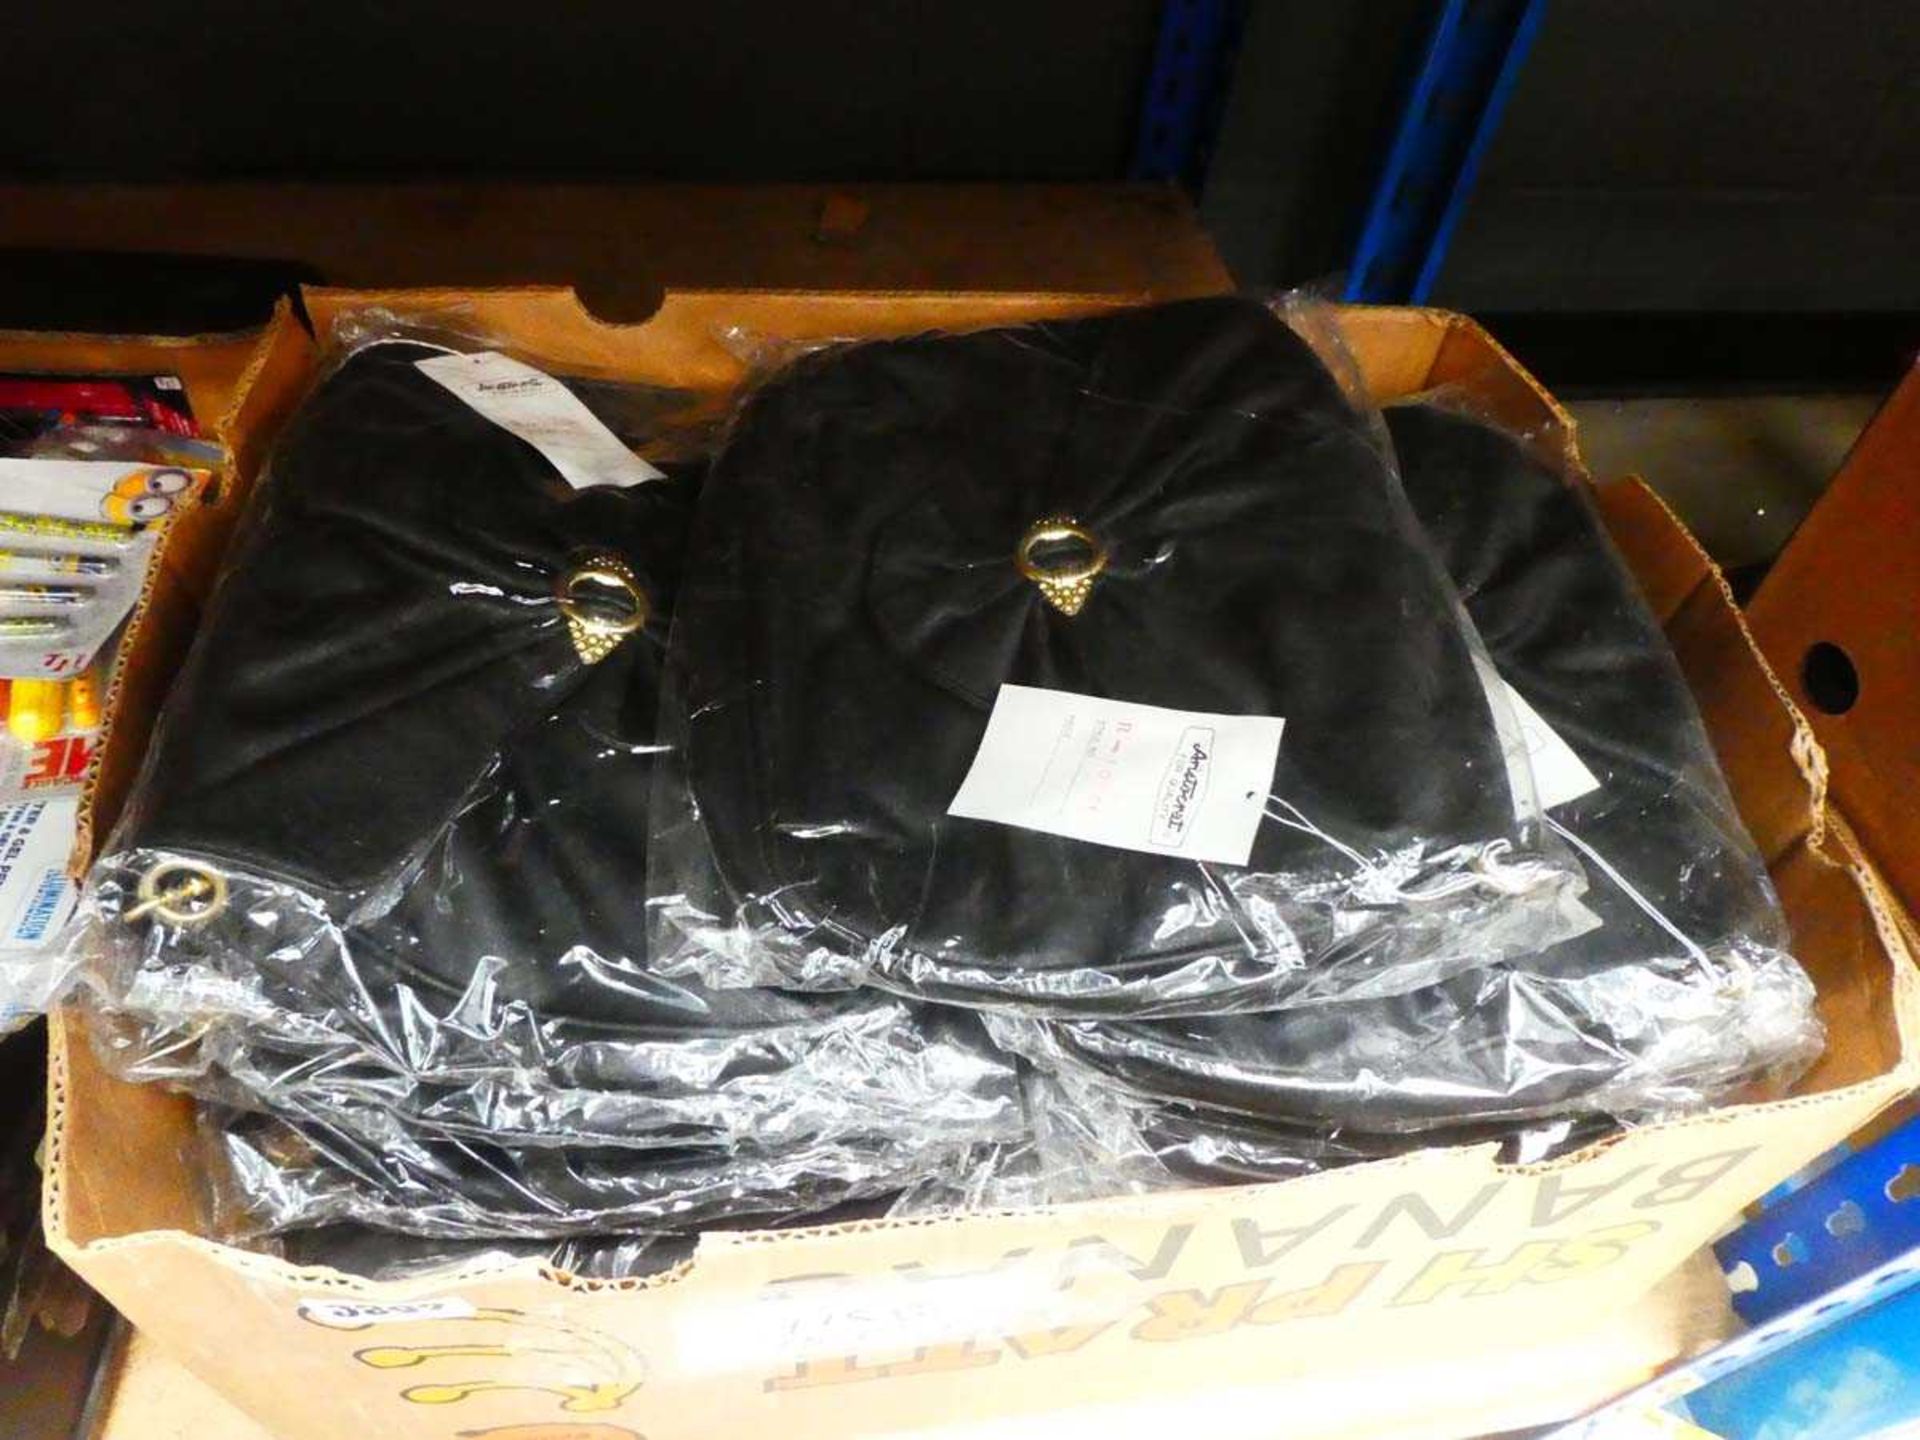 Box containing 15 black bags